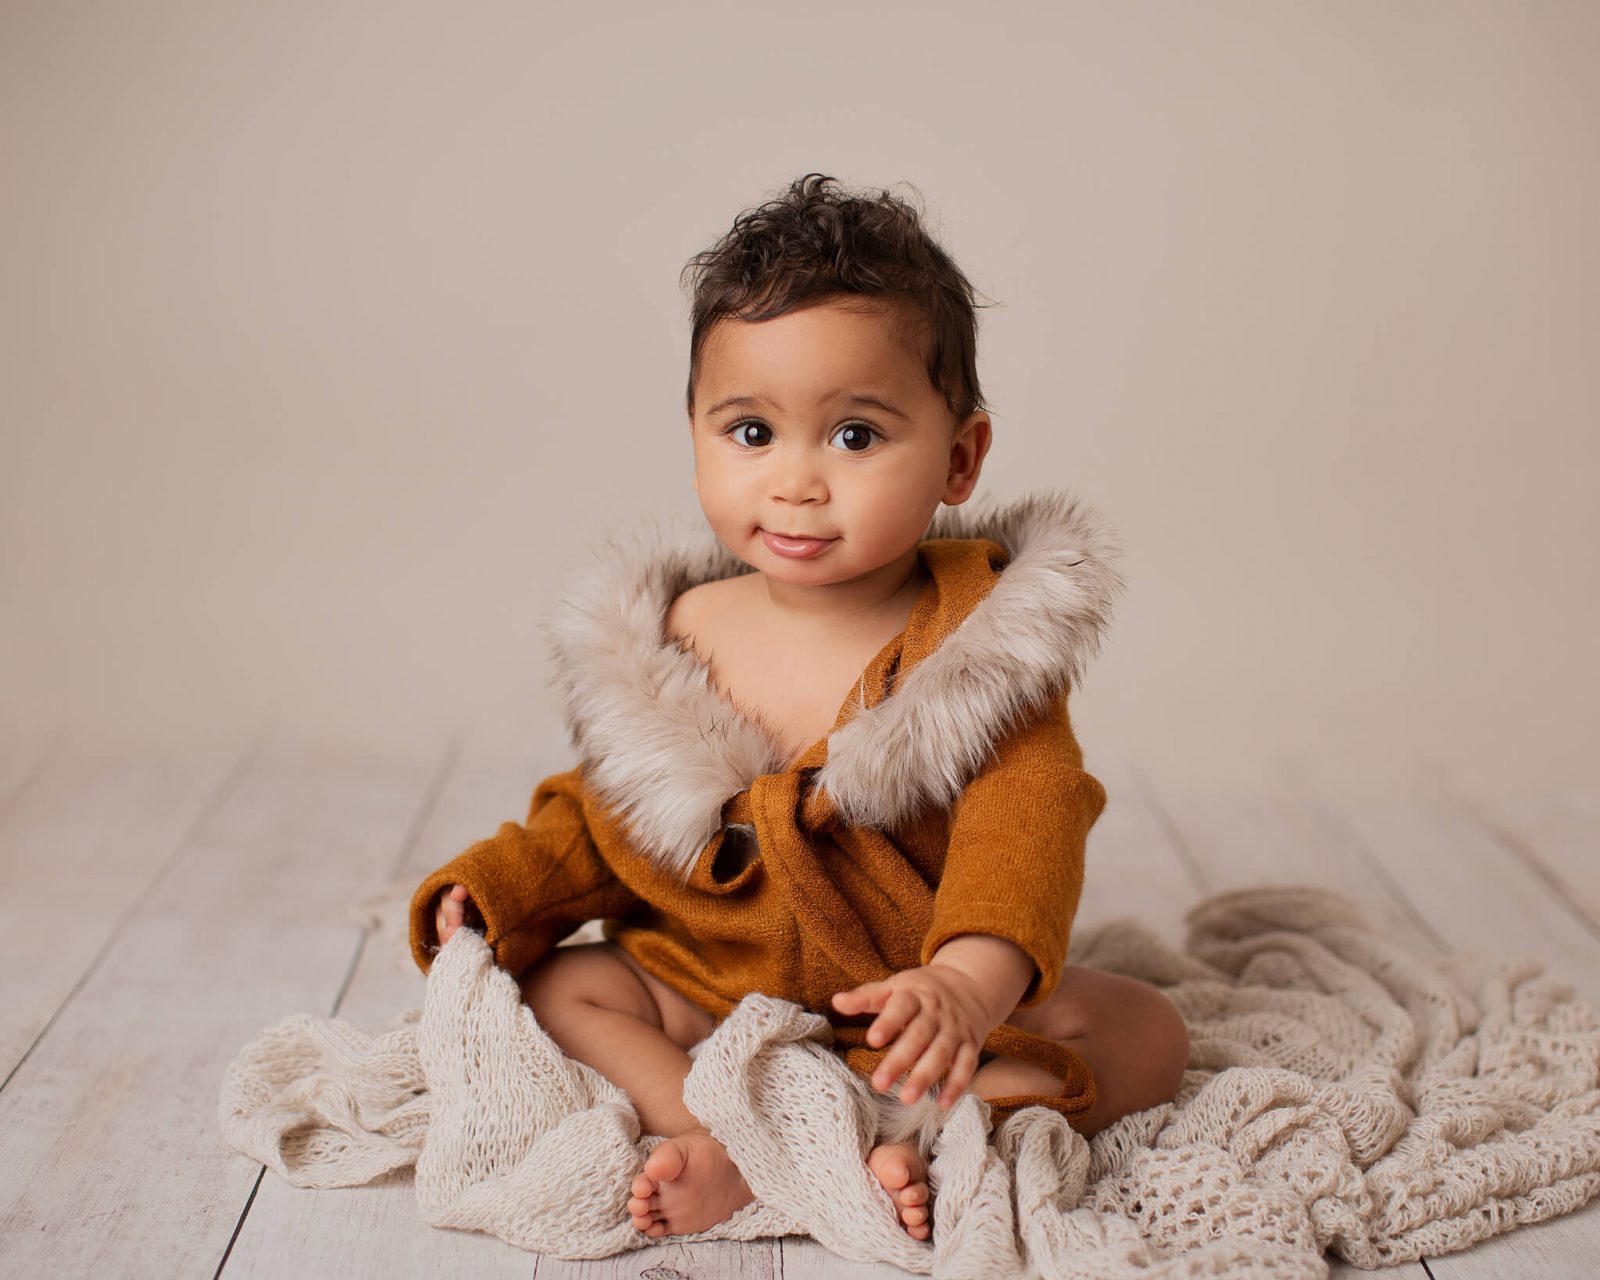 Baby Portrait photography in London